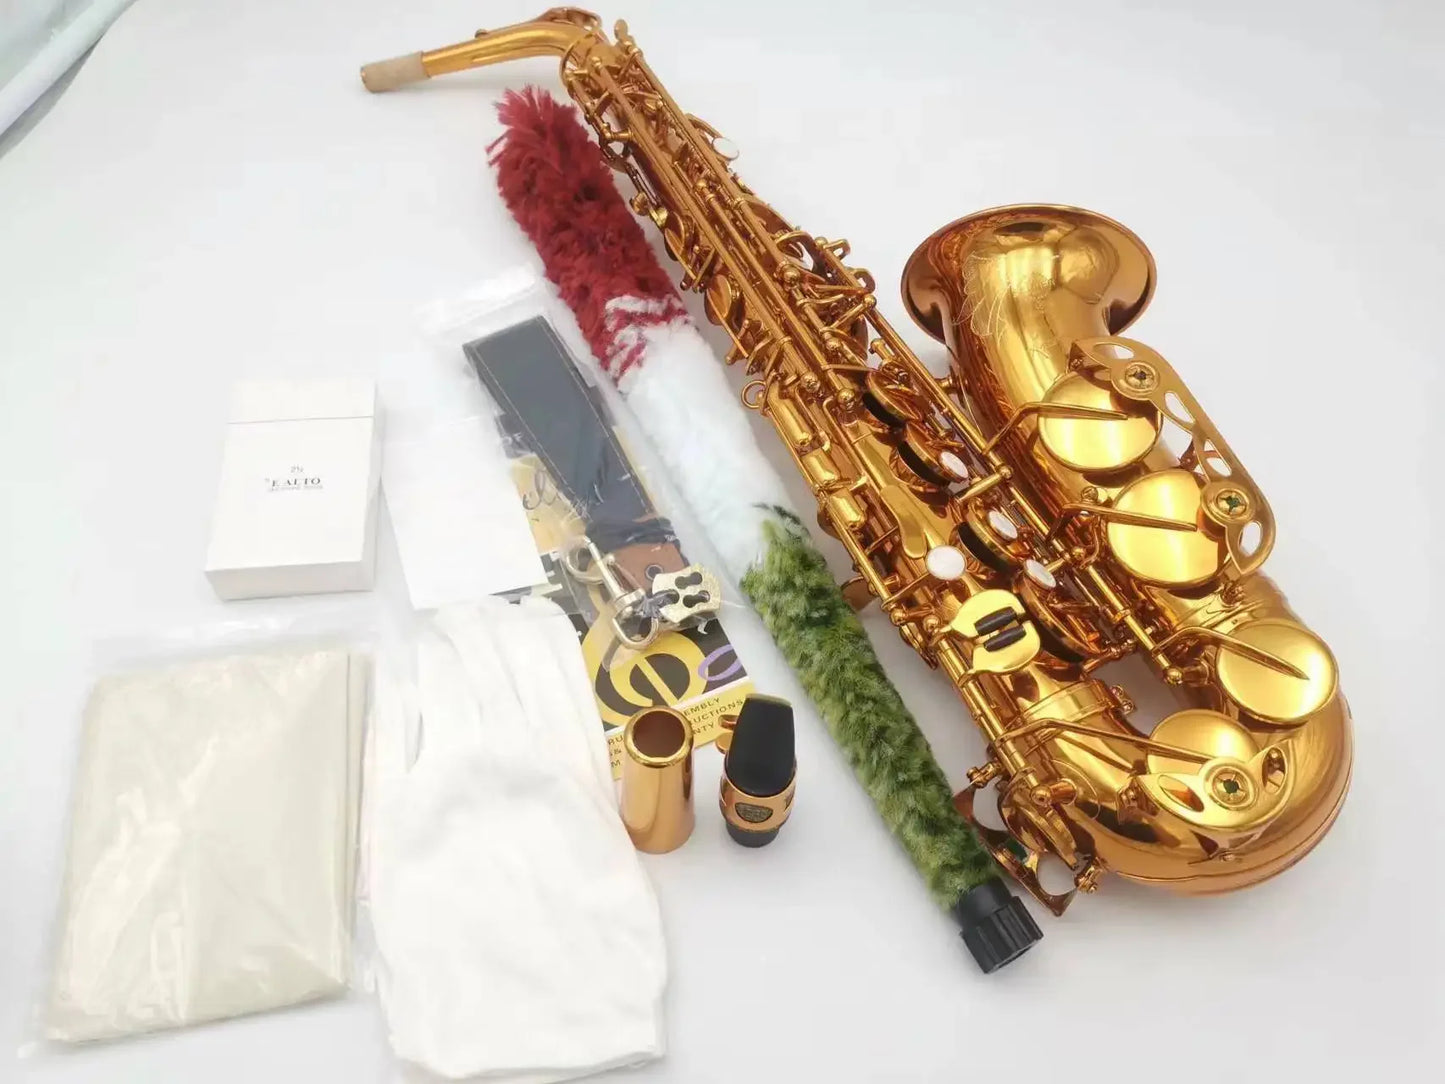 High Grade Antique Finish Eb E-flat Alto Saxophone Sax Shell Key Carve Pattern Woodwind Instrument with Case Other Aeccessaries